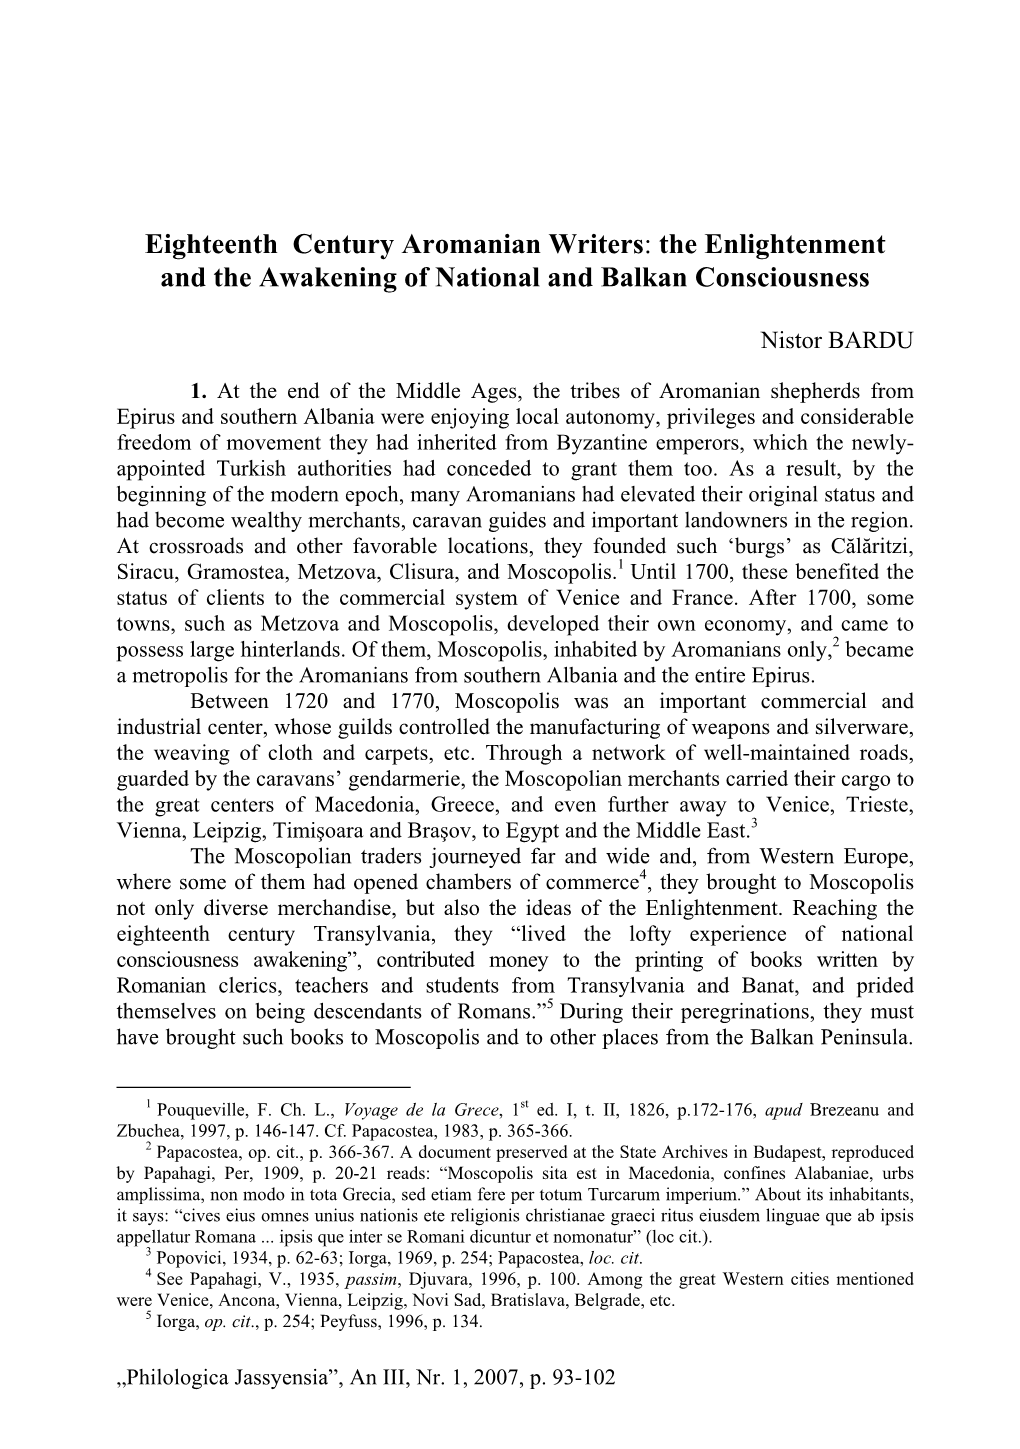 Eighteenth Century Aromanian Writers: the Enlightenment and the Awakening of National and Balkan Consciousness